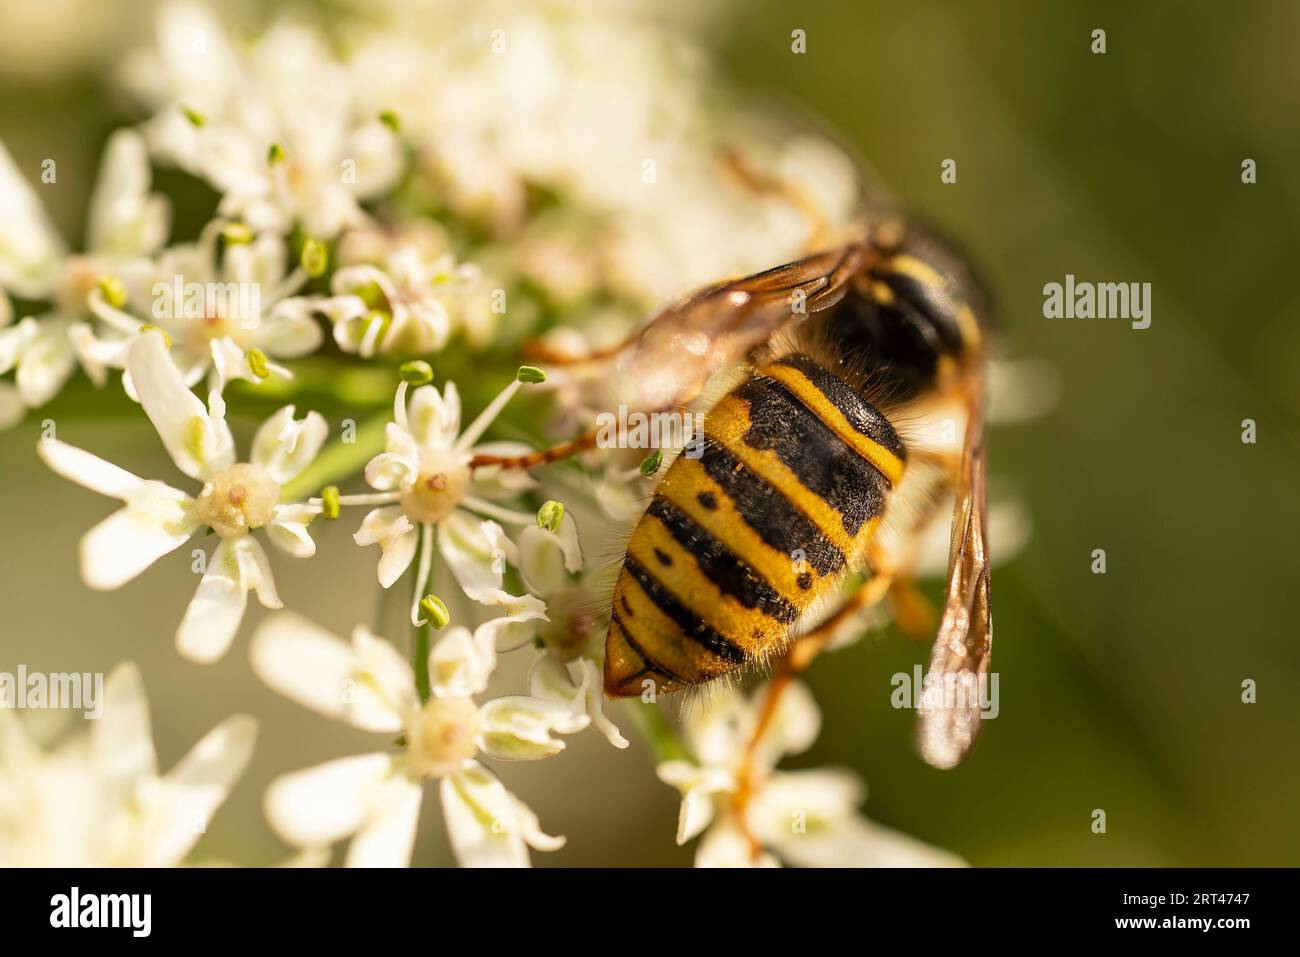 Macro photo of a wasp (Vespula) picking pollen from flowering hogweed, either a German wasp (Vespula germanica) or a common wasp (Vespula vulgaris) Stock Photo